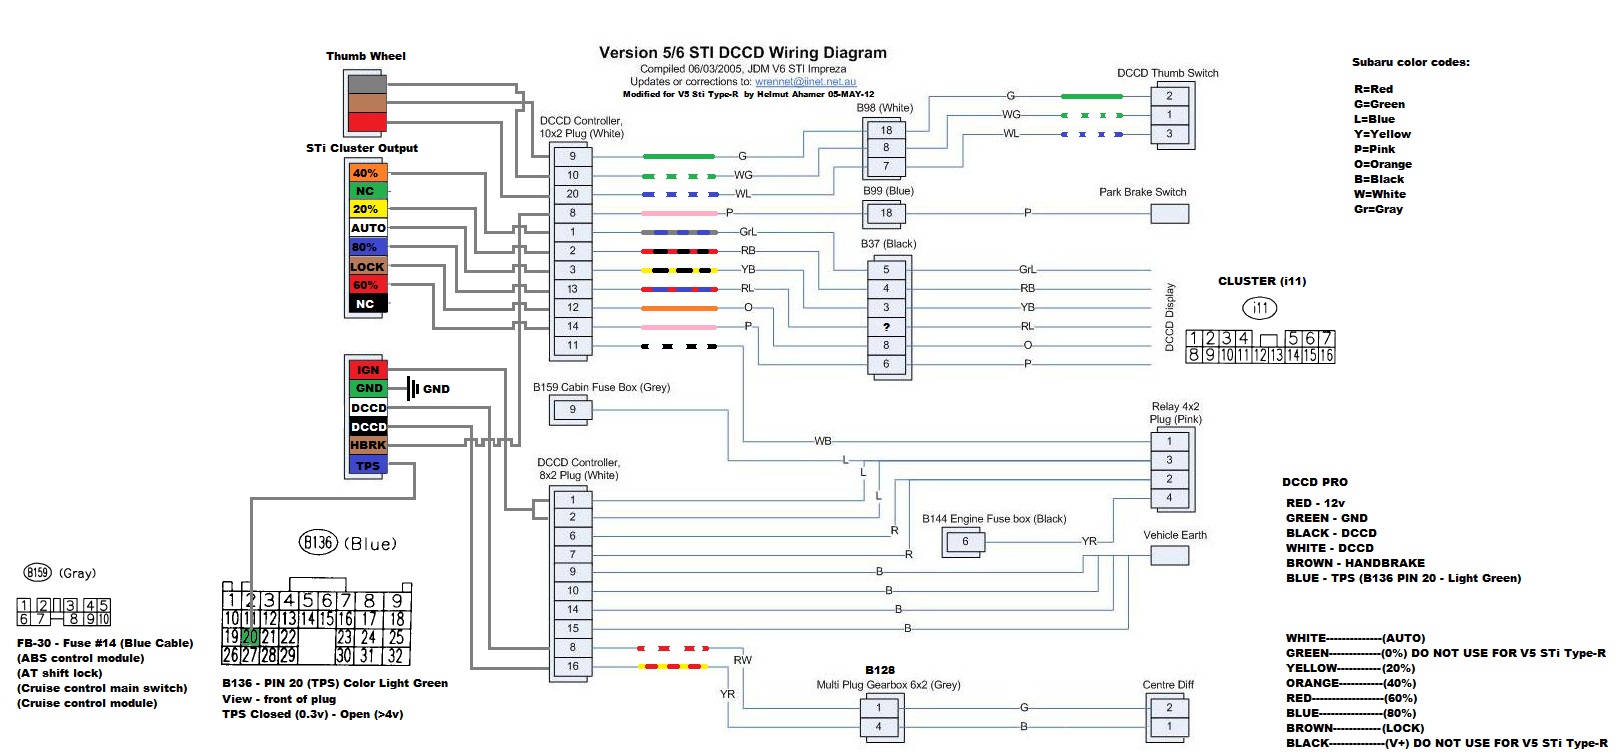 2013 Wrx Wiring Diagram Home Link | Wiring Library